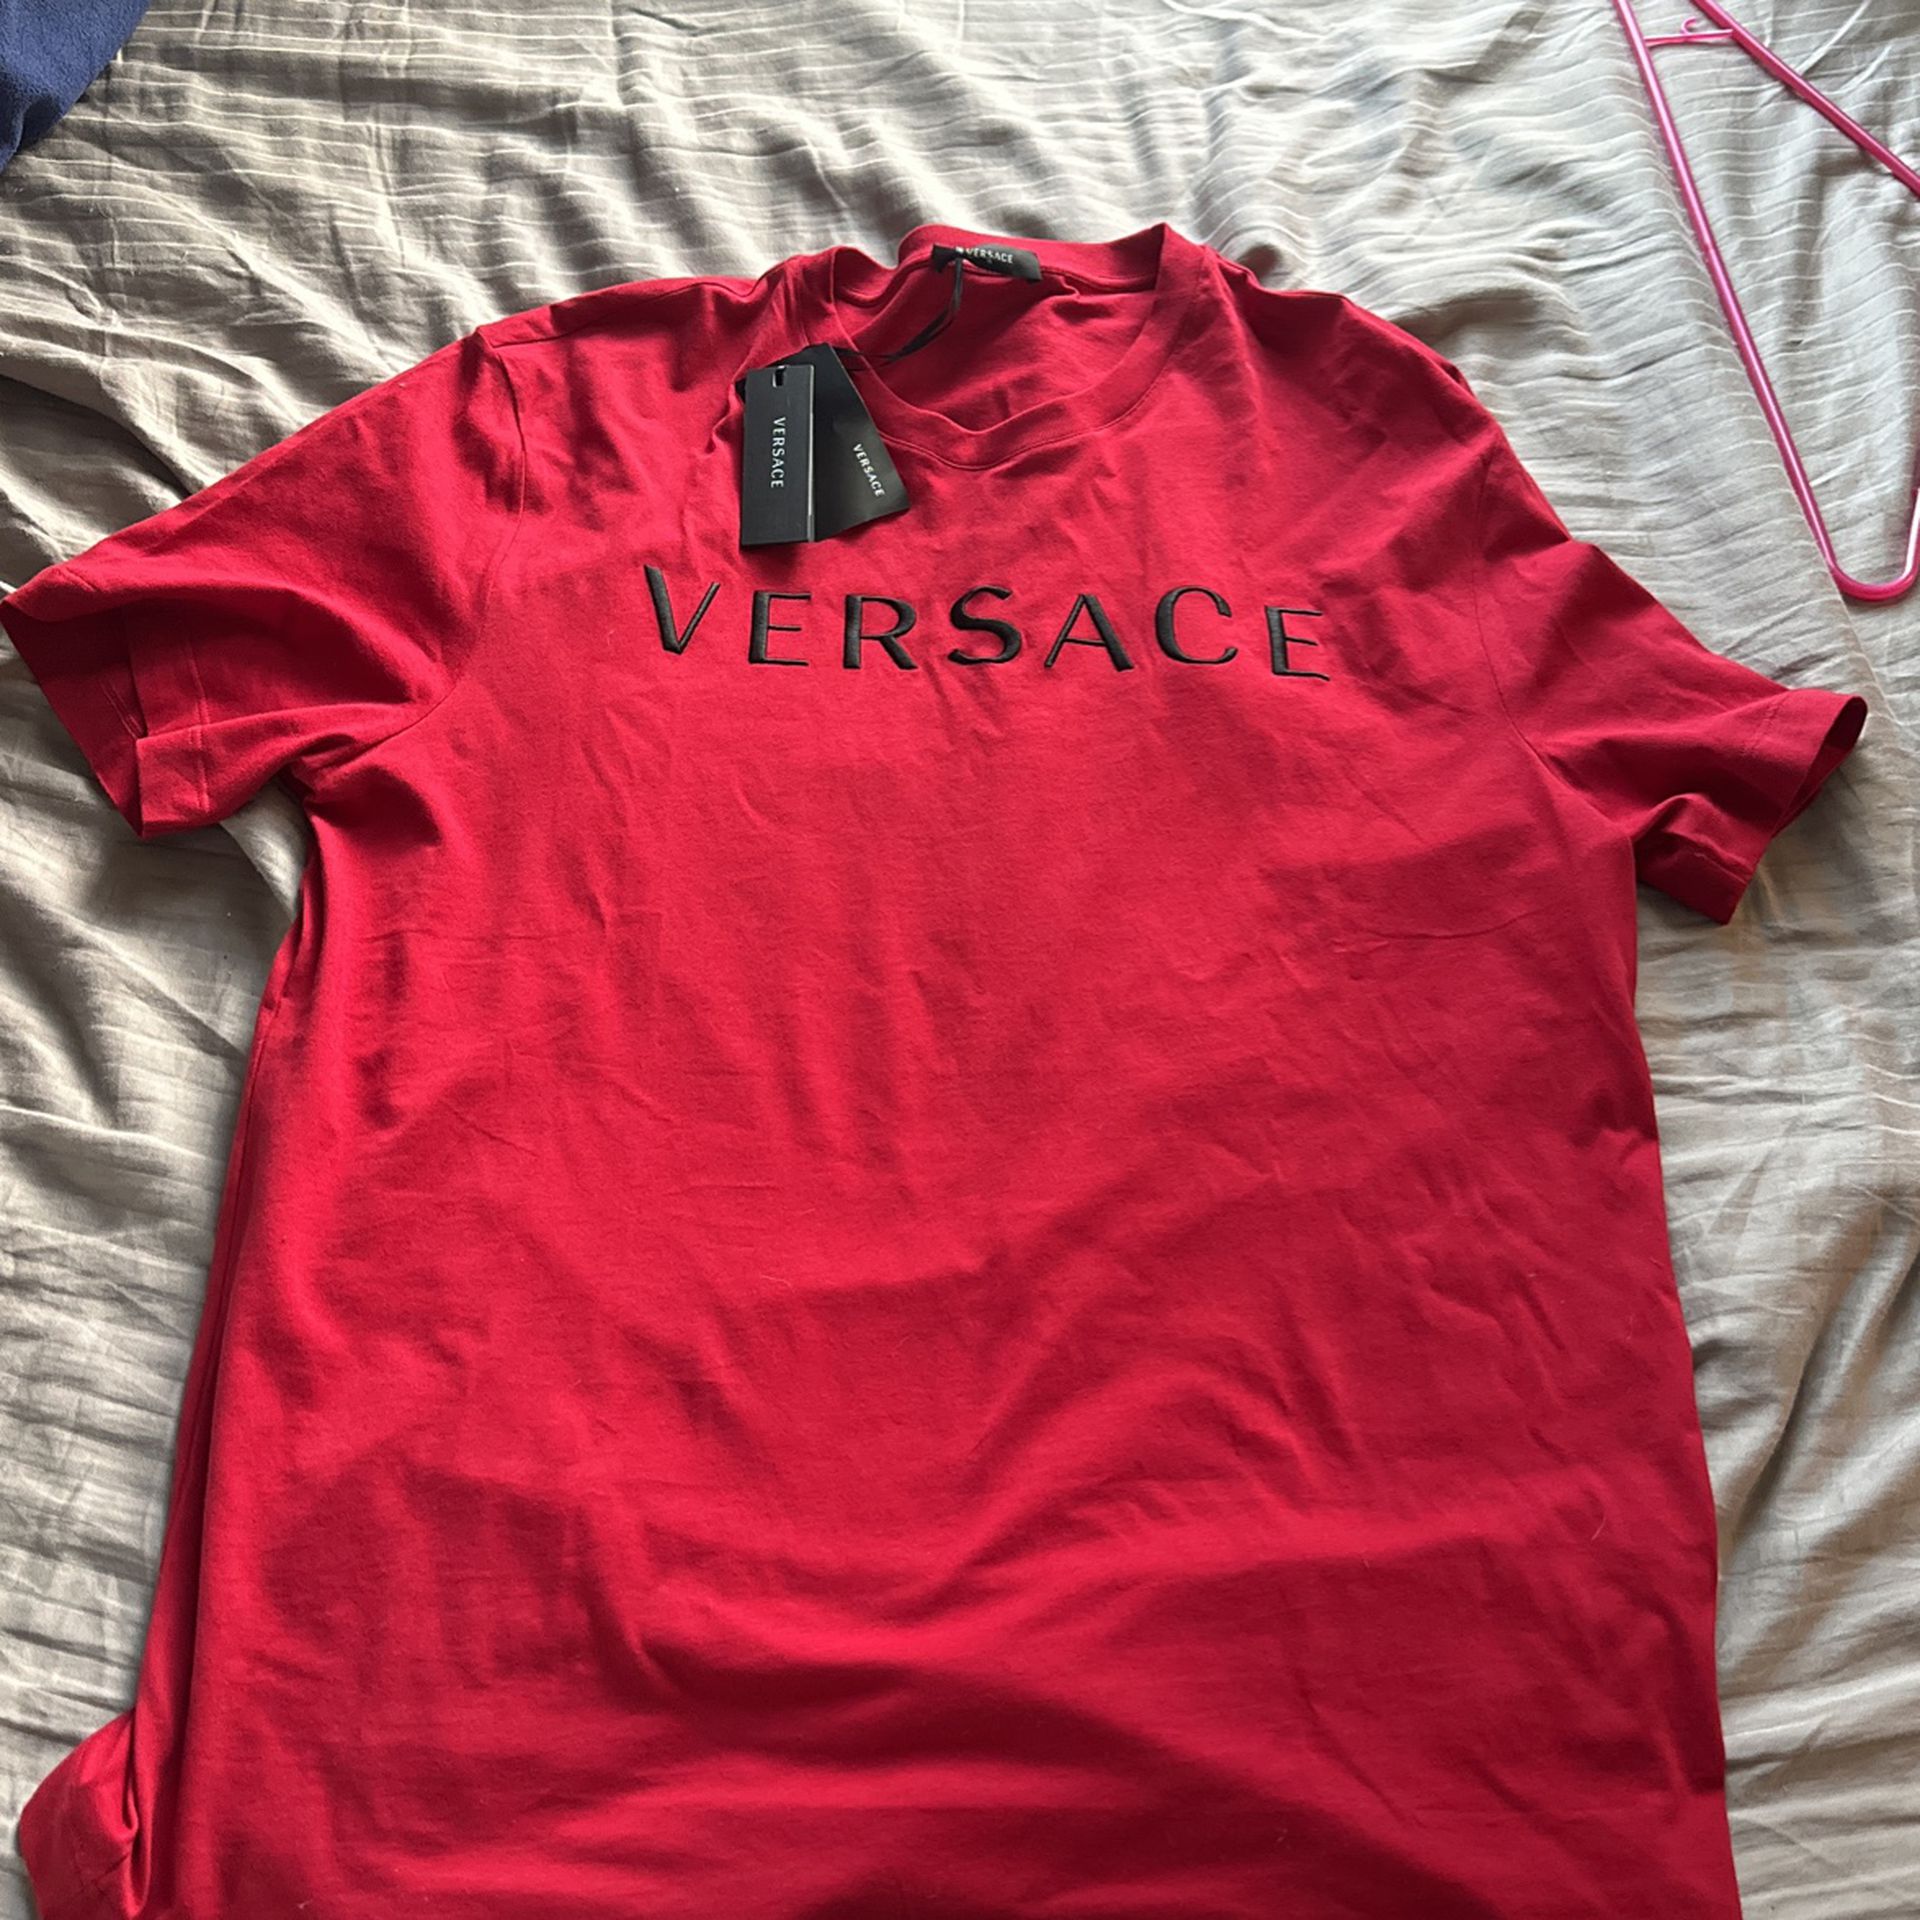 New Versace Shirt W/ Bag, Tags And Receipt 